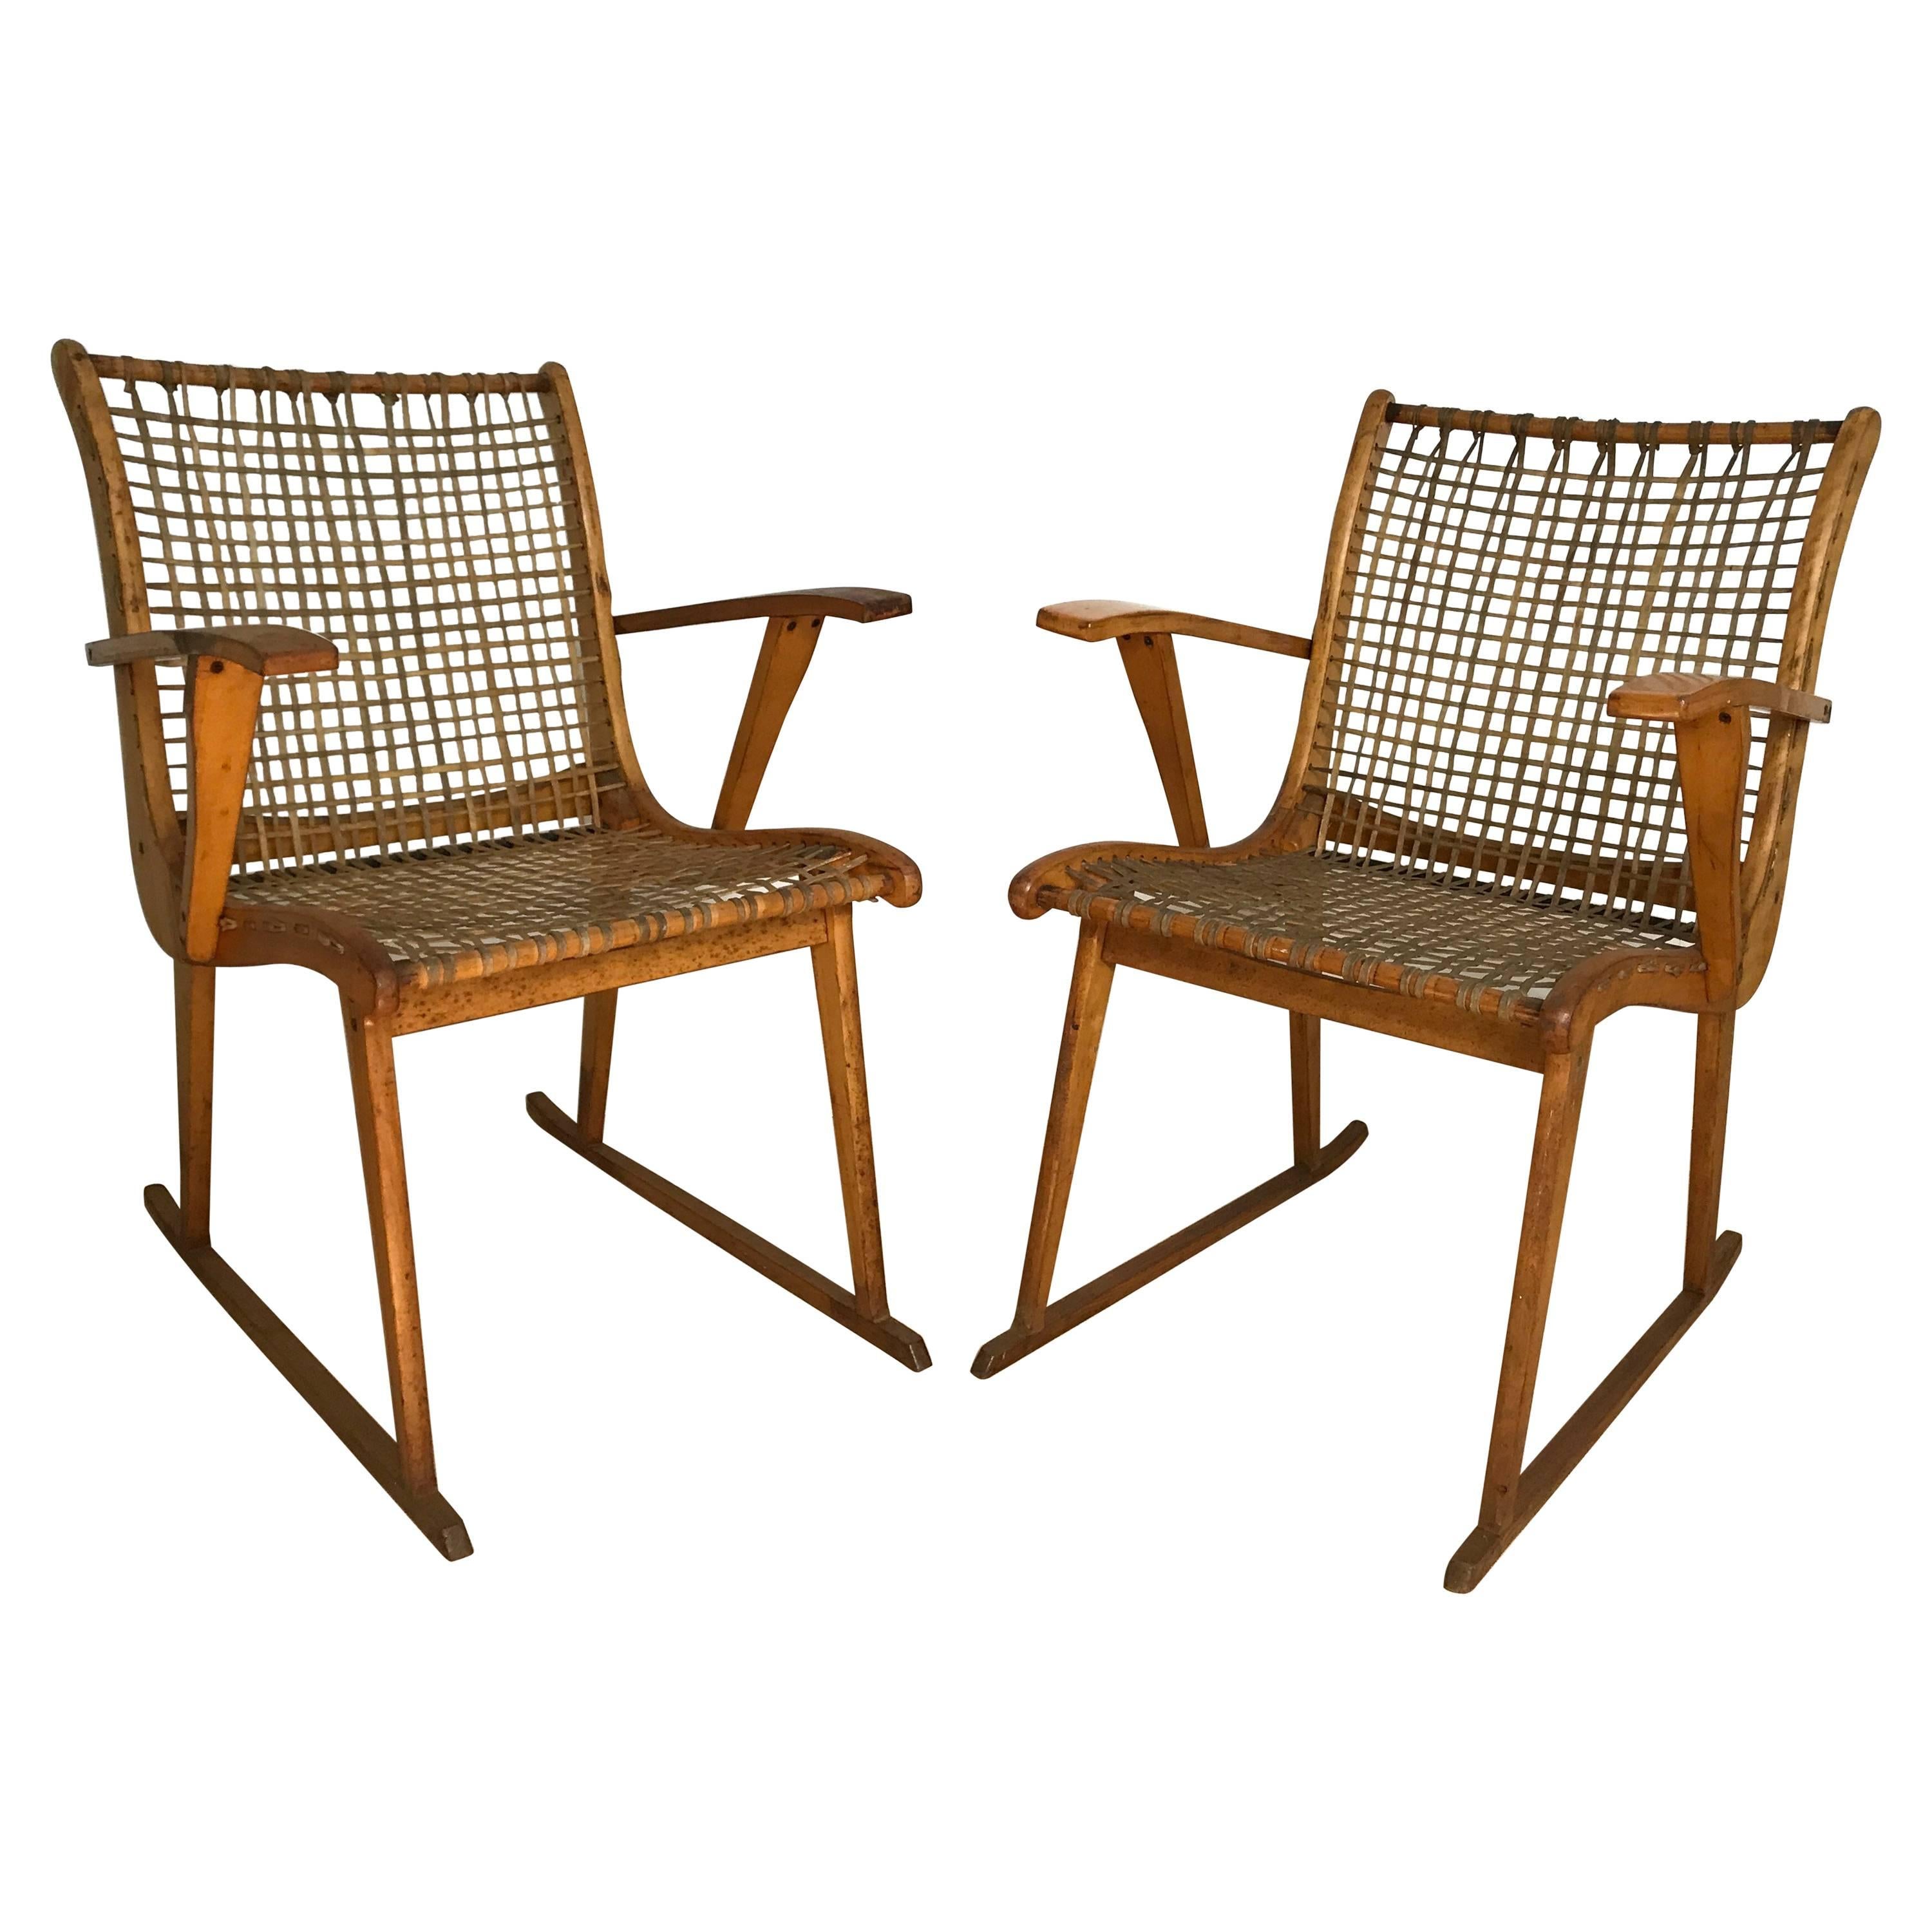 A pair of rawhide and bent ashwood armchairs by Vermont Tubbs Furniture.